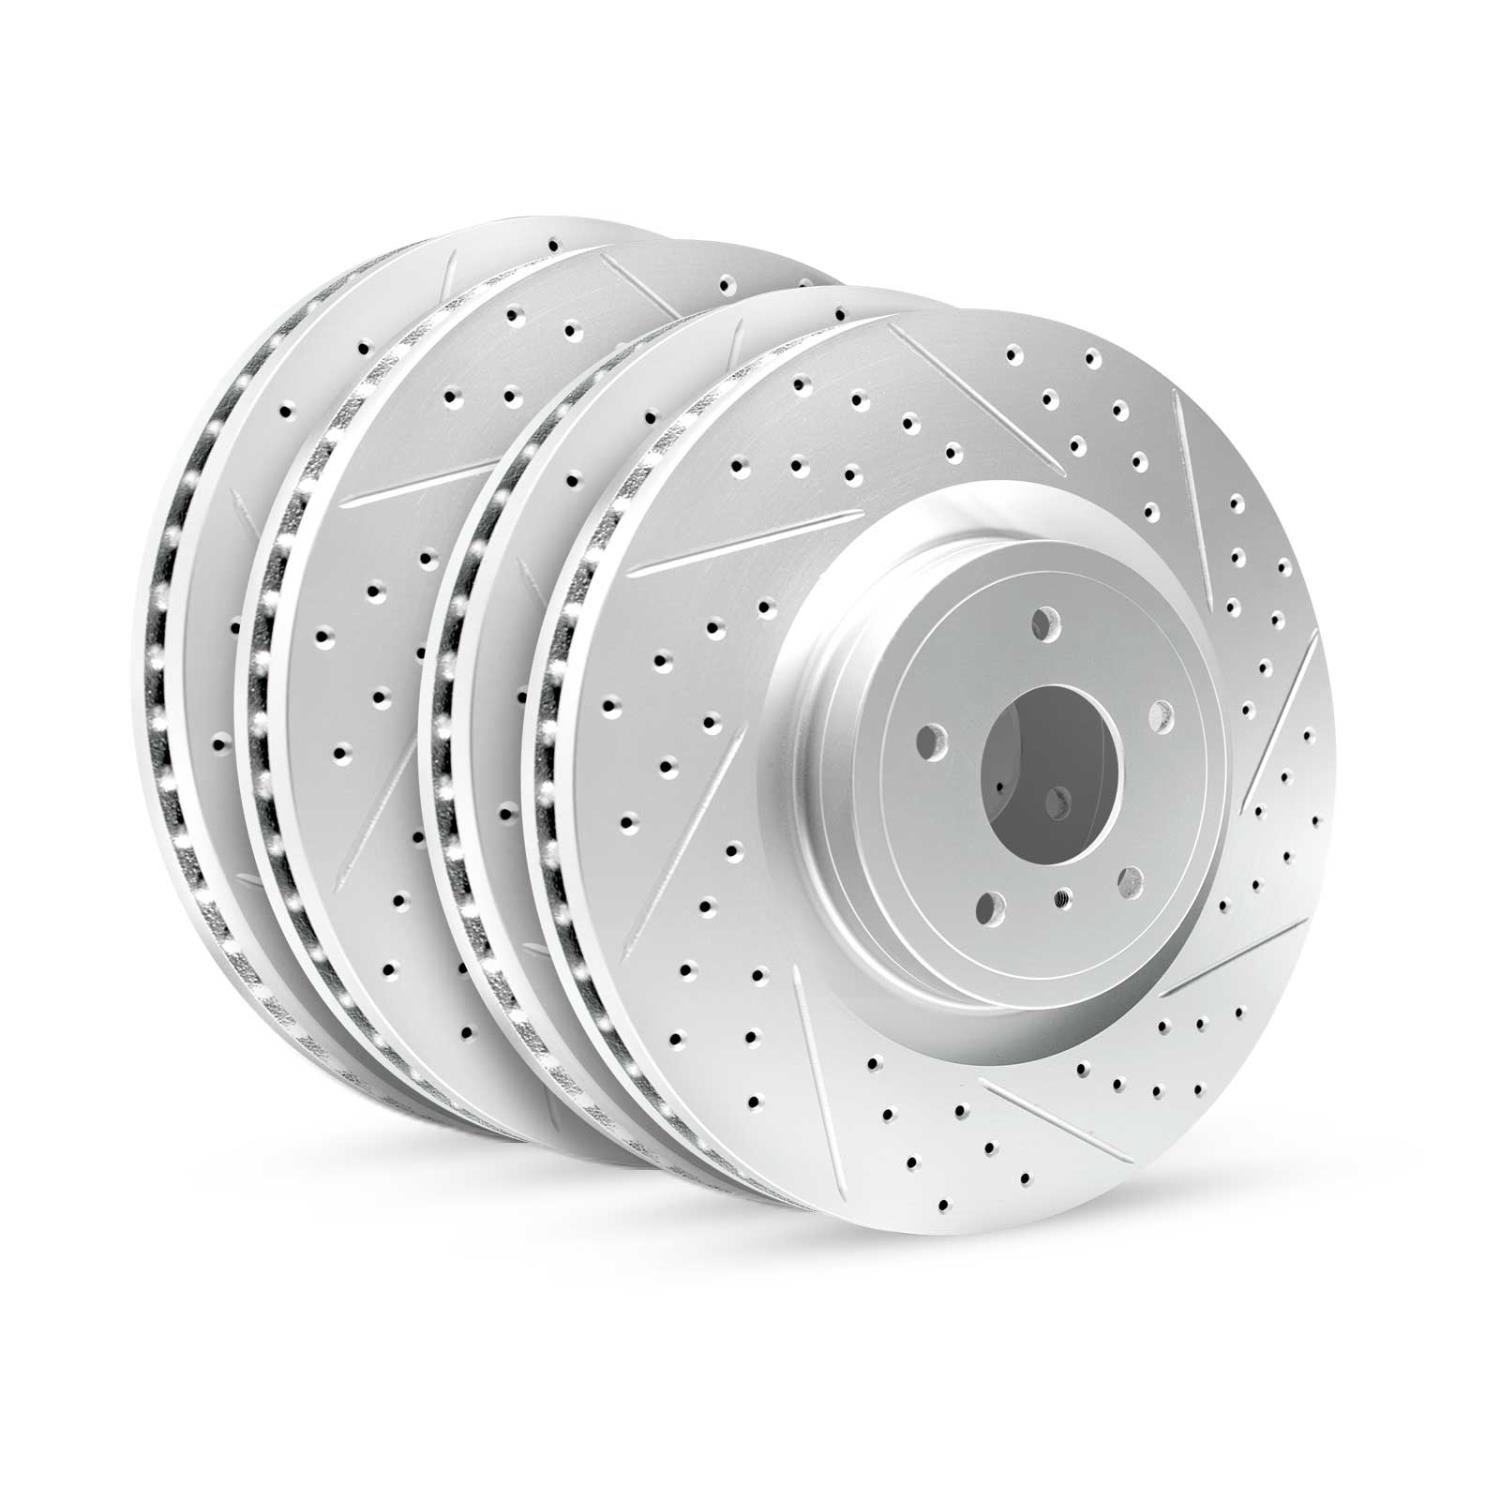 GEO-Carbon Drilled/Slotted Rotors, 2007-2019 BMW, Position: Front/Rear